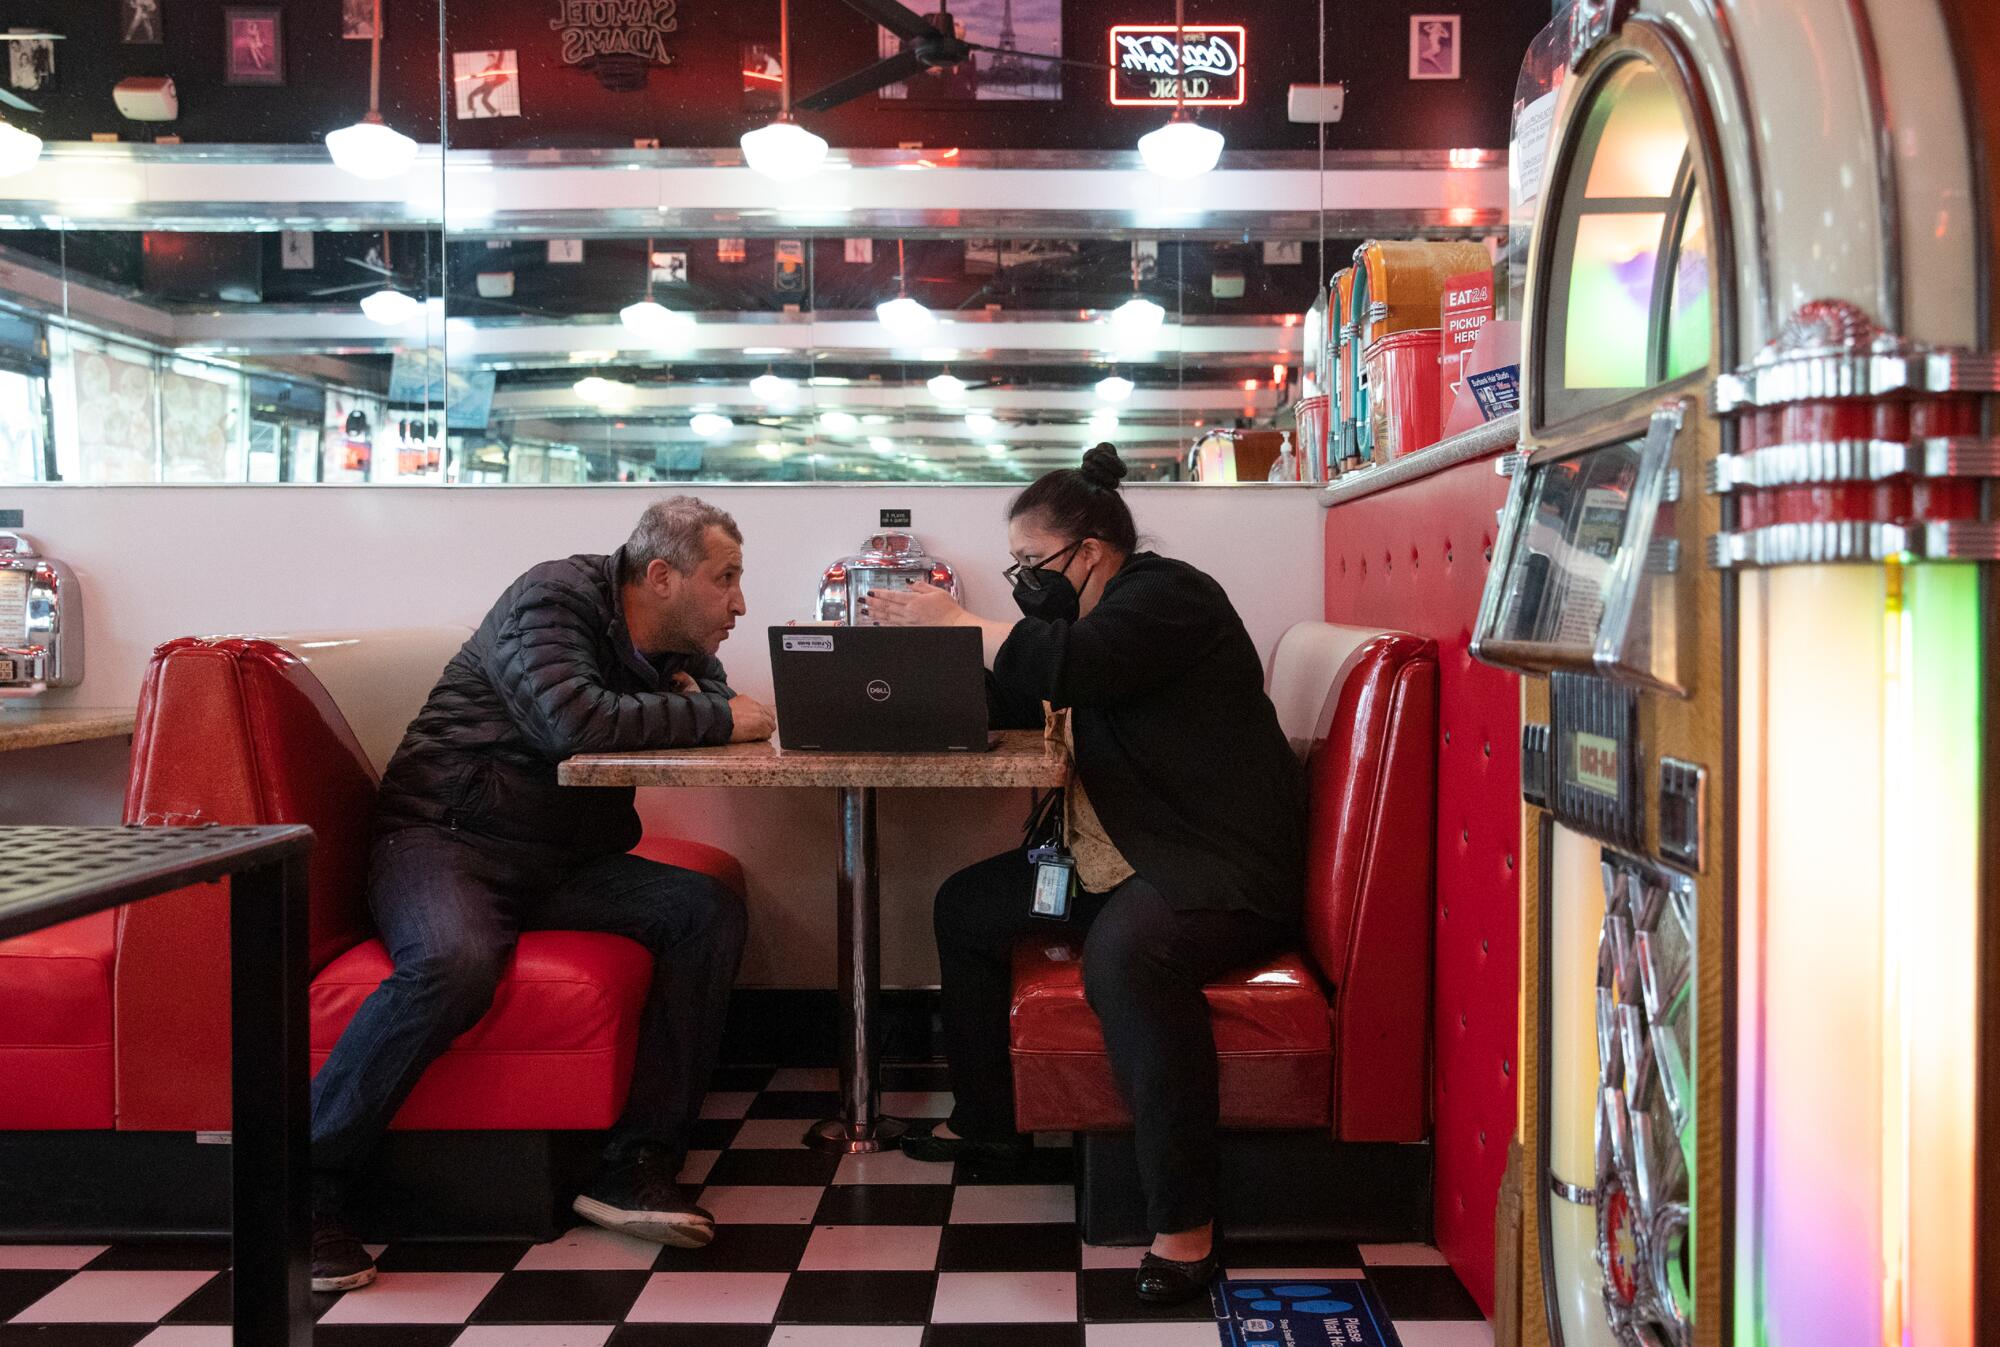 The Great Grill owner Sam Yerkanyan, left, talks with Ngoc McShane in a diner booth.